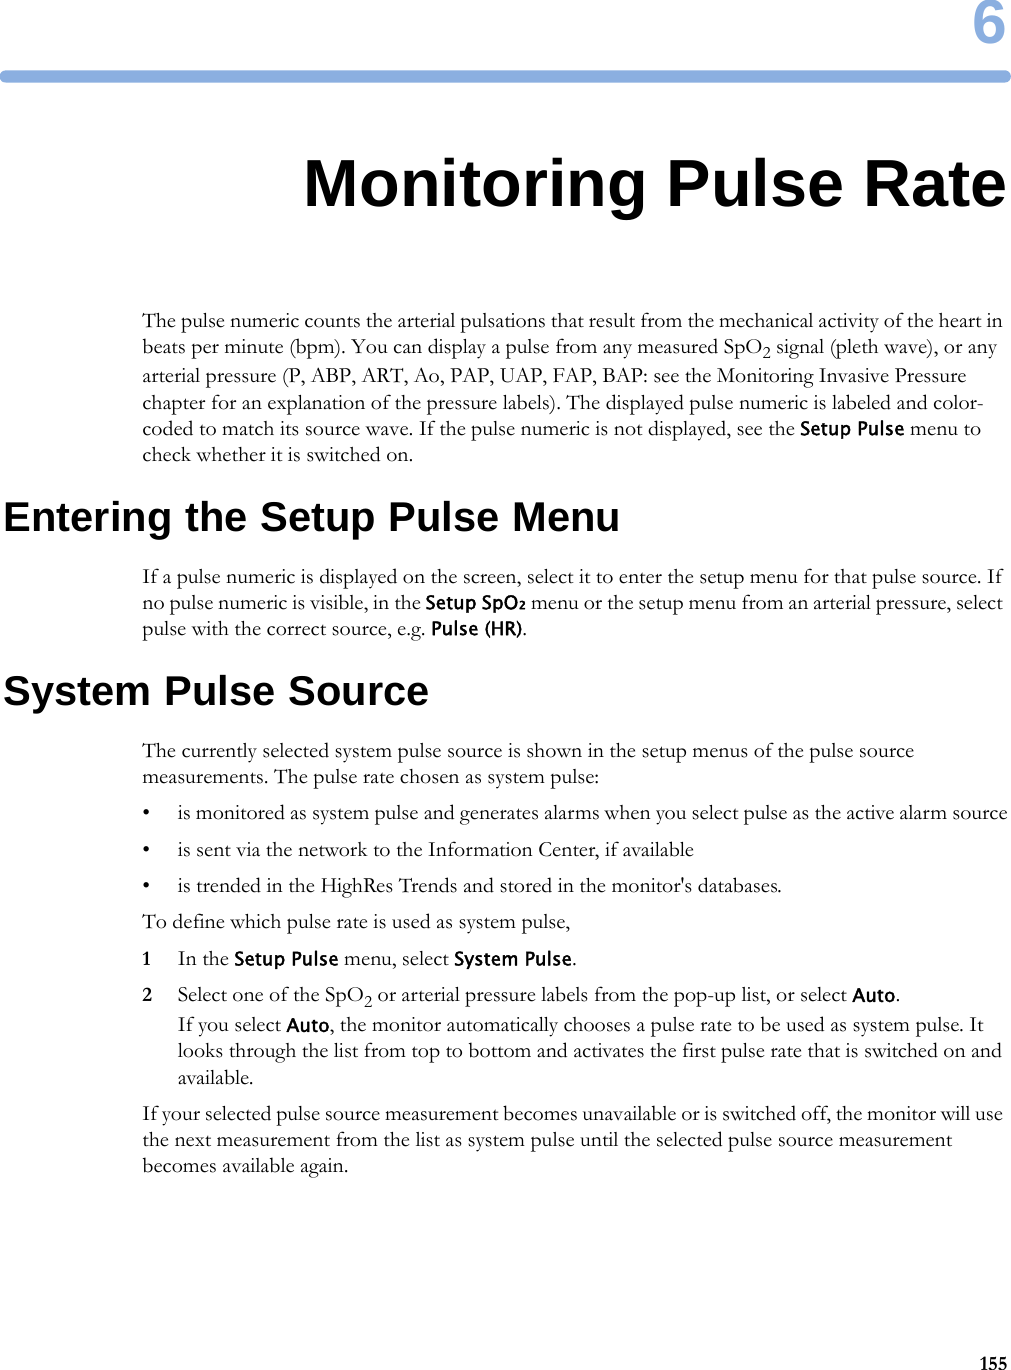 61556Monitoring Pulse RateThe pulse numeric counts the arterial pulsations that result from the mechanical activity of the heart in beats per minute (bpm). You can display a pulse from any measured SpO2 signal (pleth wave), or any arterial pressure (P, ABP, ART, Ao, PAP, UAP, FAP, BAP: see the Monitoring Invasive Pressure chapter for an explanation of the pressure labels). The displayed pulse numeric is labeled and color-coded to match its source wave. If the pulse numeric is not displayed, see the Setup Pulse menu to check whether it is switched on.Entering the Setup Pulse MenuIf a pulse numeric is displayed on the screen, select it to enter the setup menu for that pulse source. If no pulse numeric is visible, in the Setup SpO₂ menu or the setup menu from an arterial pressure, select pulse with the correct source, e.g. Pulse (HR).System Pulse SourceThe currently selected system pulse source is shown in the setup menus of the pulse source measurements. The pulse rate chosen as system pulse:• is monitored as system pulse and generates alarms when you select pulse as the active alarm source• is sent via the network to the Information Center, if available• is trended in the HighRes Trends and stored in the monitor&apos;s databases.To define which pulse rate is used as system pulse,1In the Setup Pulse menu, select System Pulse.2Select one of the SpO2 or arterial pressure labels from the pop-up list, or select Auto. If you select Auto, the monitor automatically chooses a pulse rate to be used as system pulse. It looks through the list from top to bottom and activates the first pulse rate that is switched on and available.If your selected pulse source measurement becomes unavailable or is switched off, the monitor will use the next measurement from the list as system pulse until the selected pulse source measurement becomes available again.